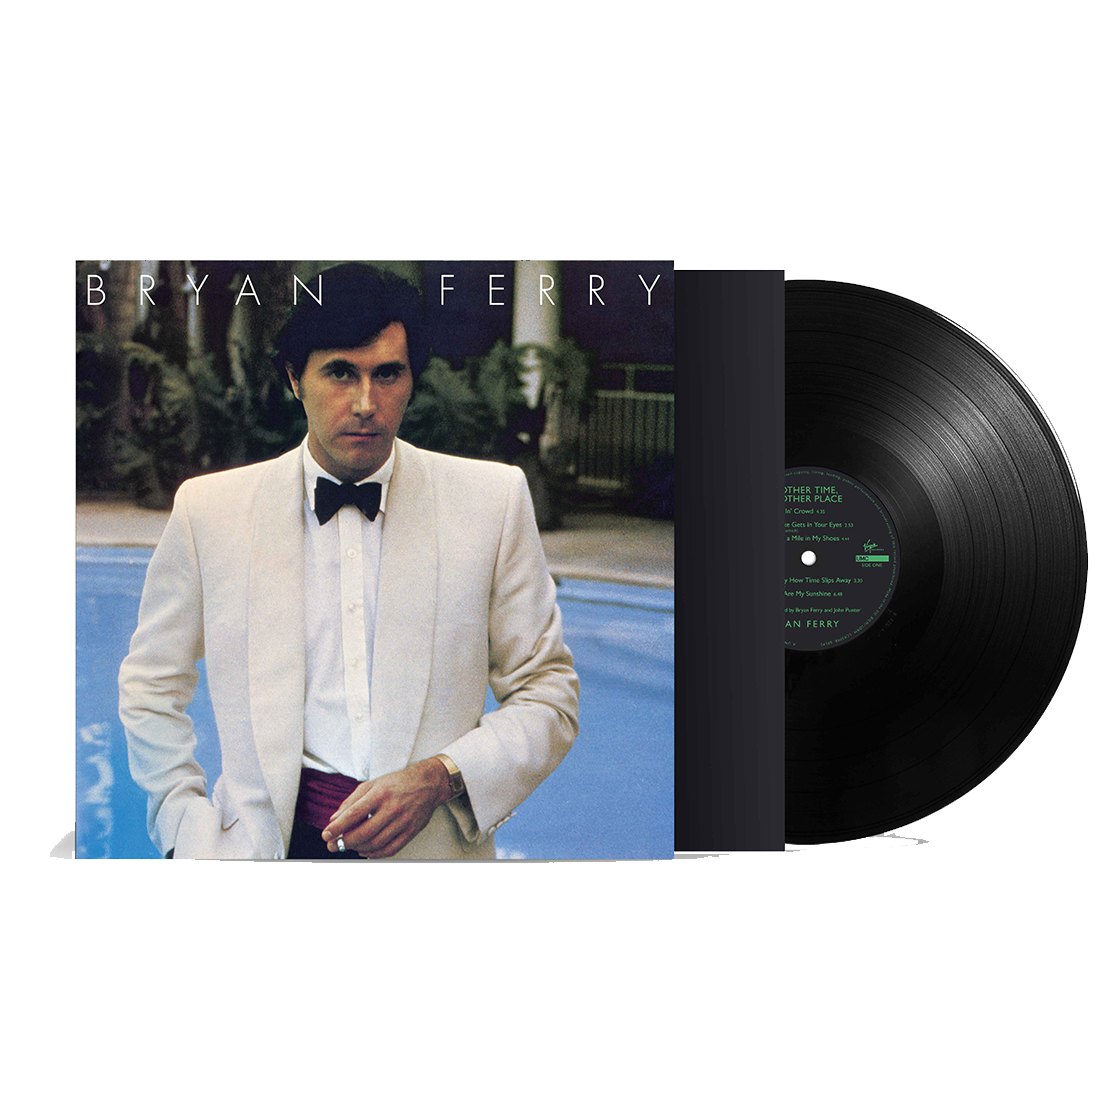 Bryan Ferry - Another Time, Another Place: Vinyl LP